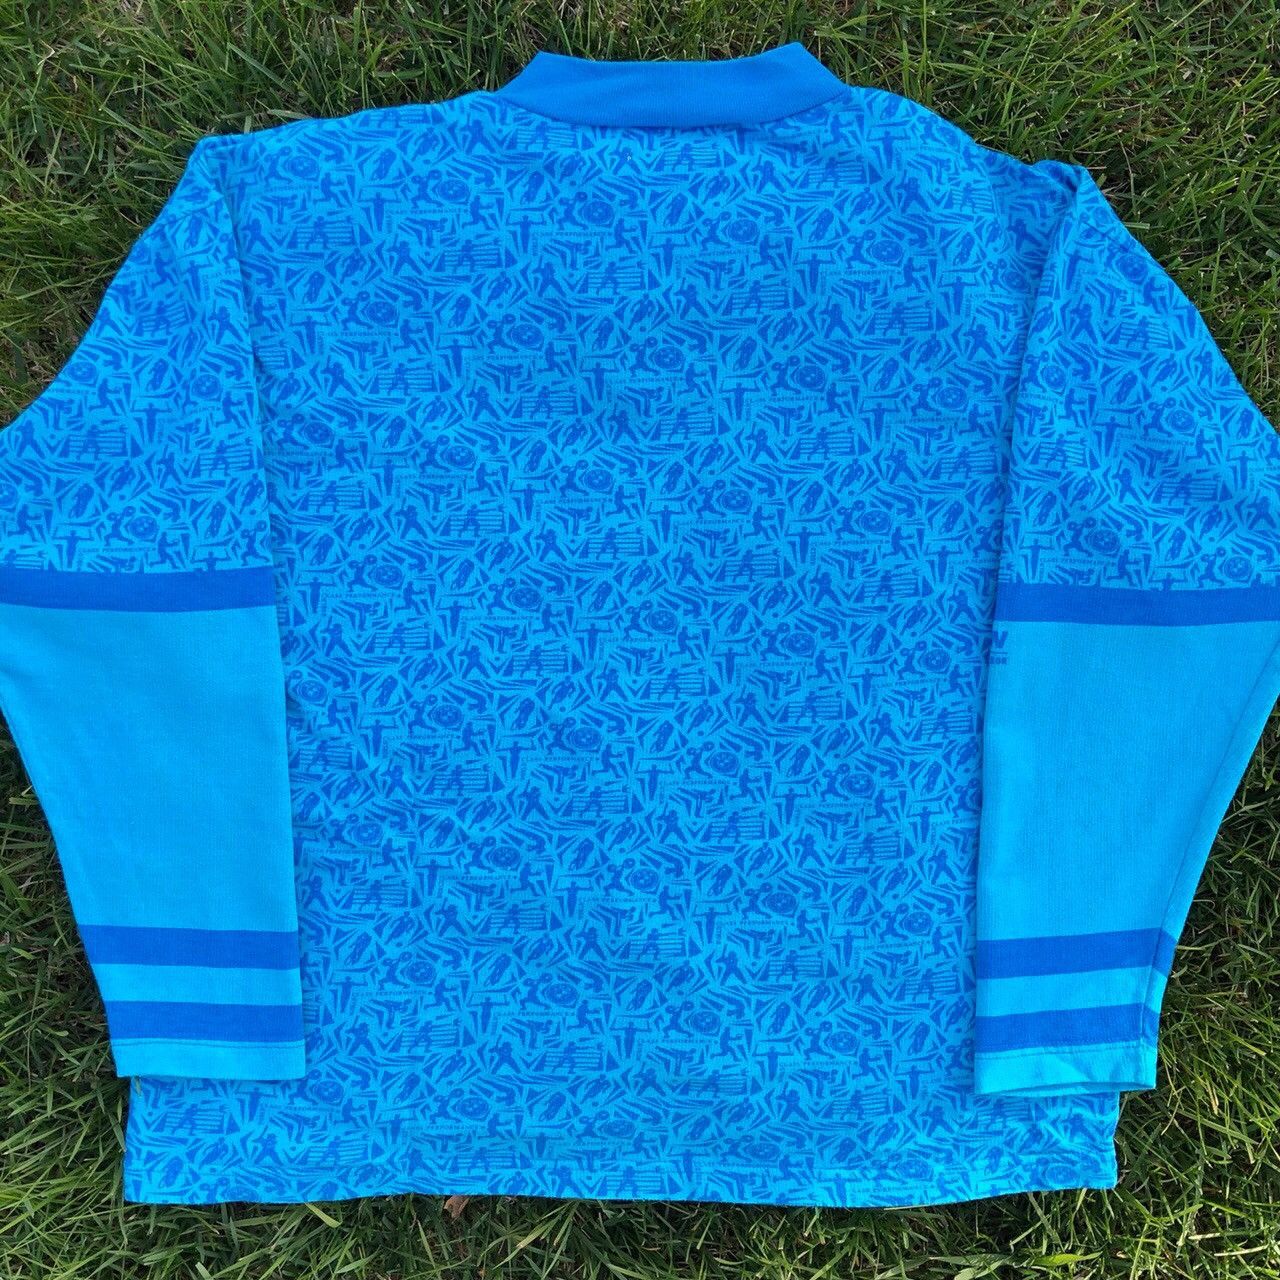 Vintage VTG BMW Nike ACG USA Olympics Long Sleeve Rare Made in USA Size US M / EU 48-50 / 2 - 4 Preview